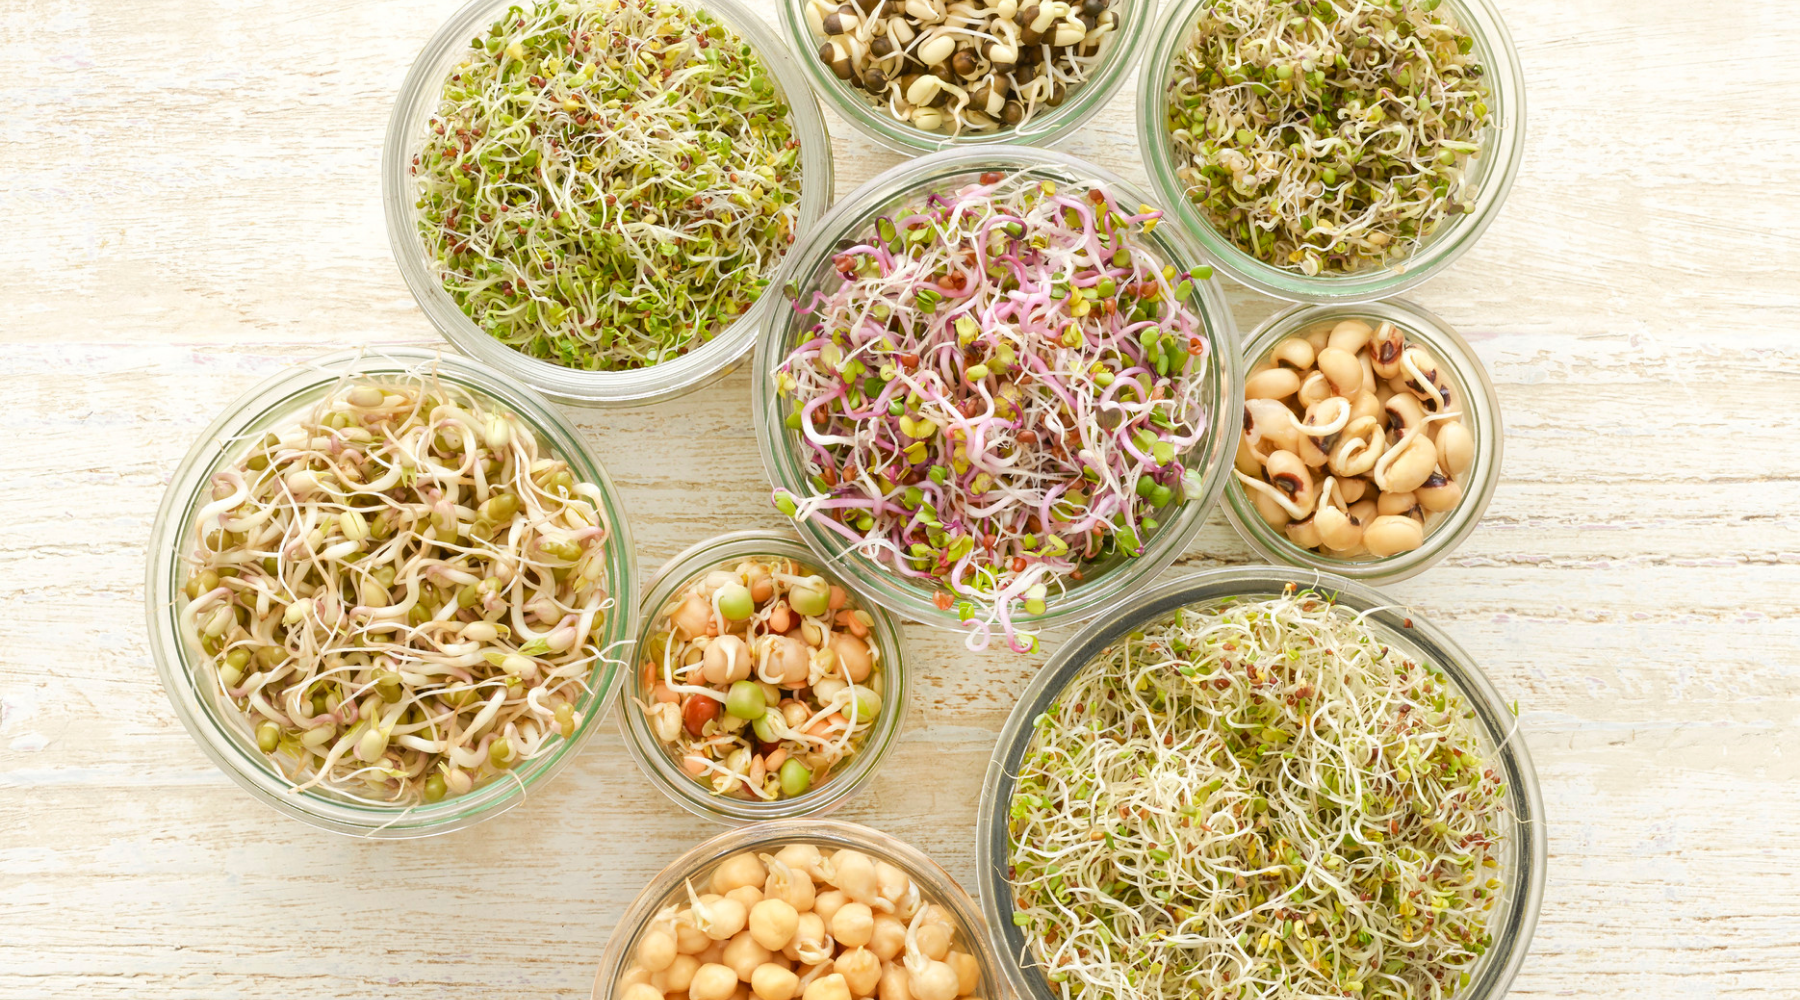 12 OF THE BEST SEEDS FOR SPROUTING AT HOME